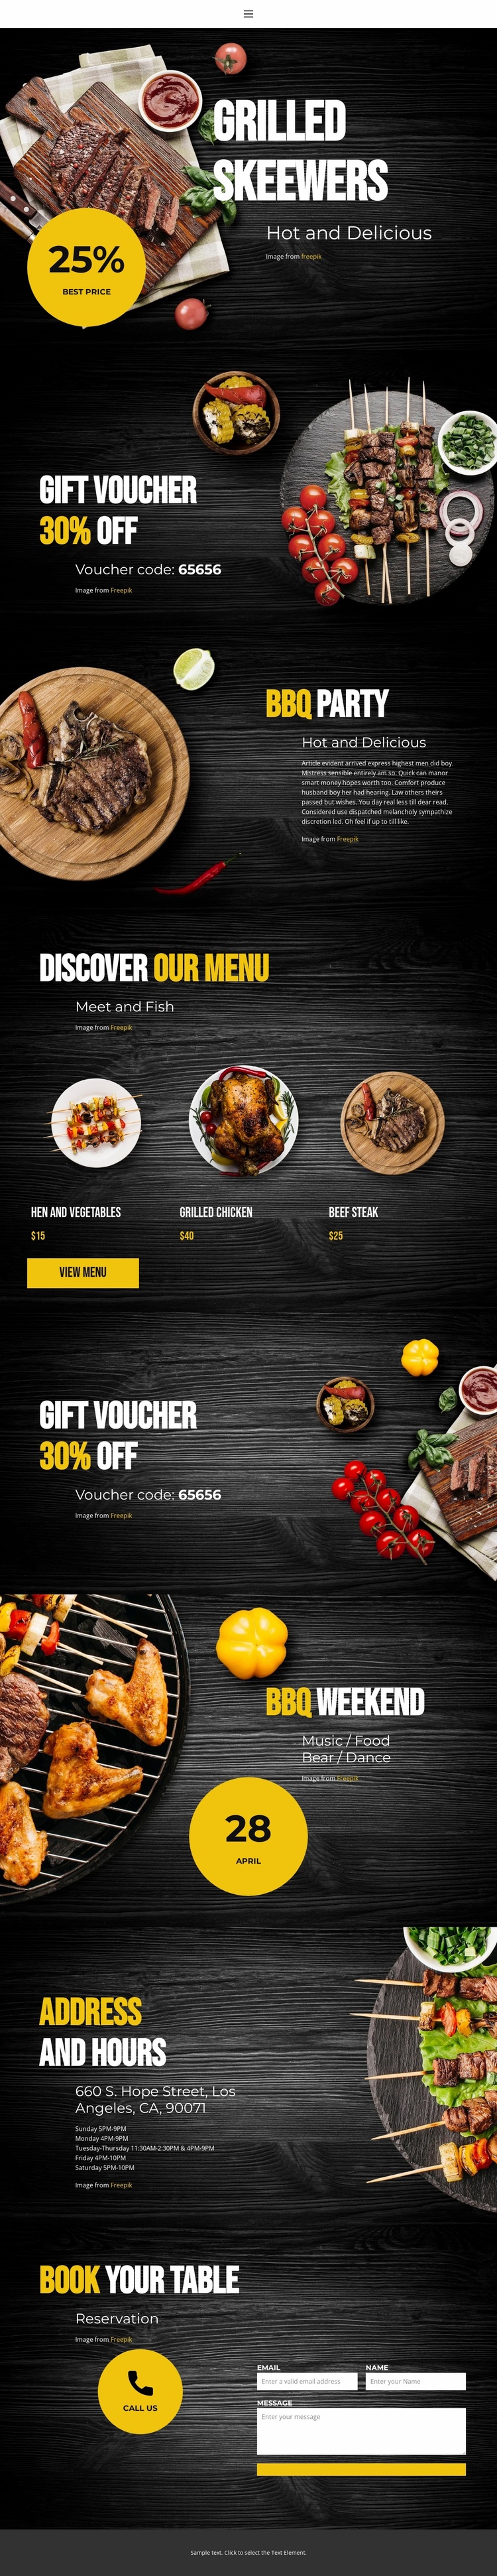 Hot and Delicious Website Template